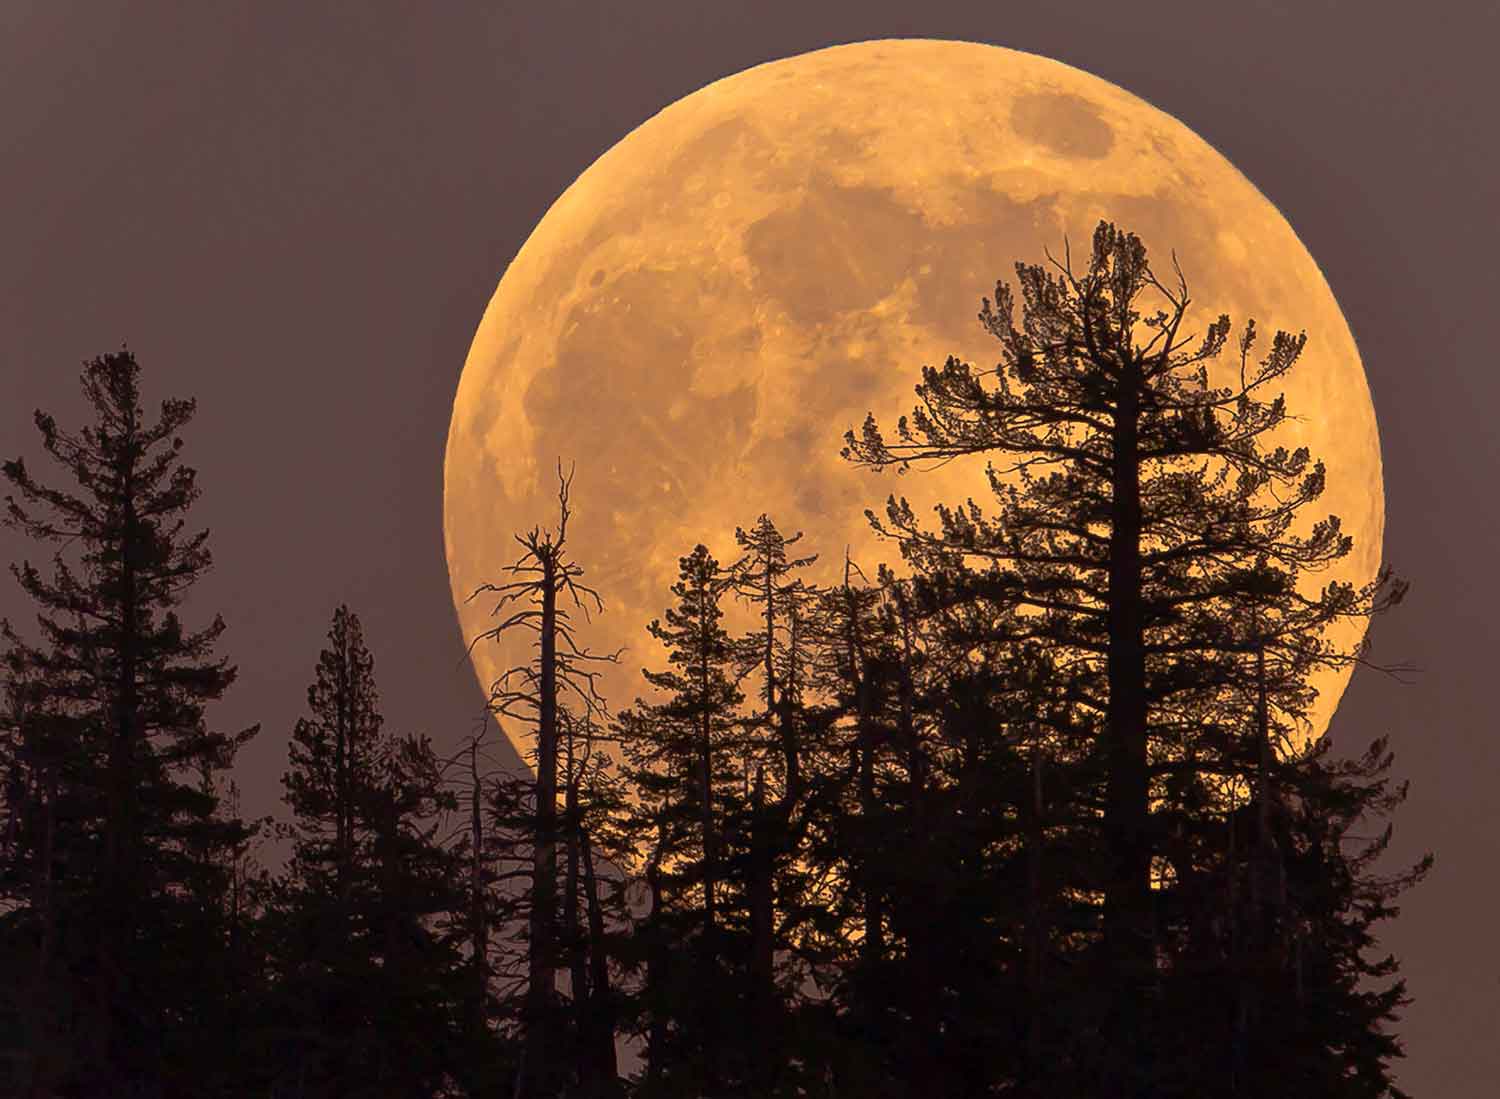 A huge full moon with an orange tint in the night sky behind pine trees.